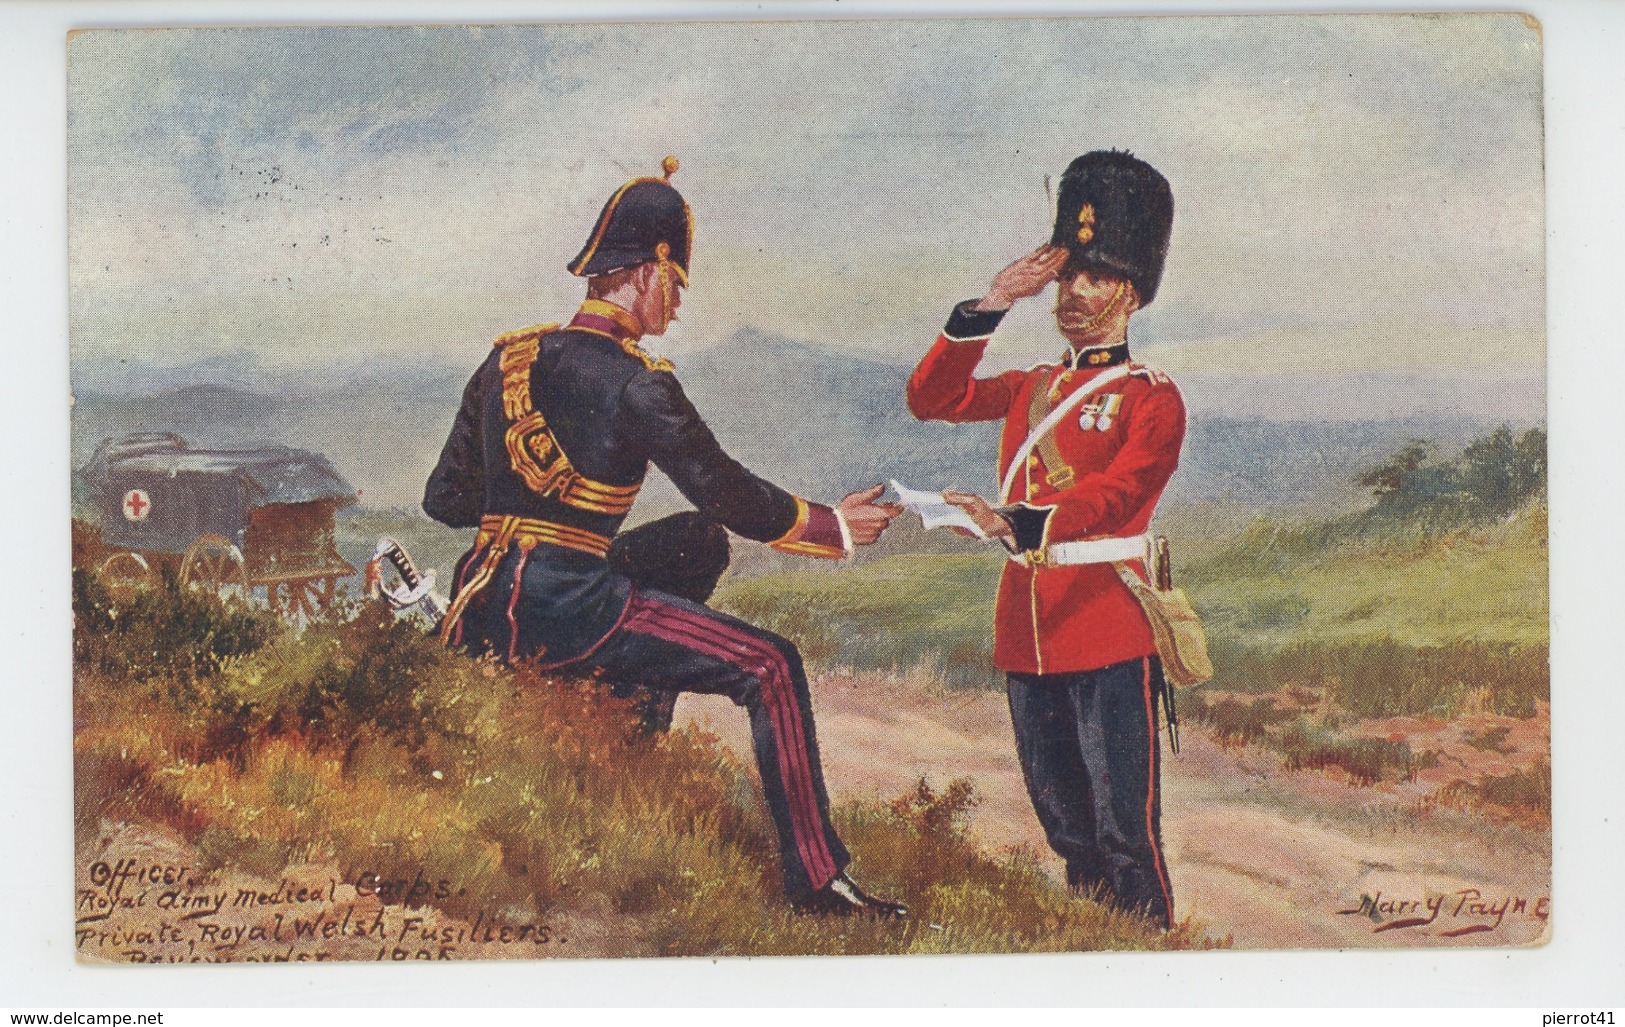 MILITARIA - ROYAUME UNI - ENGLAND - Officer Royal Army Medical Corps - Private Royal Welsh Fusiliers - By HARRY PAYNE - Regiments